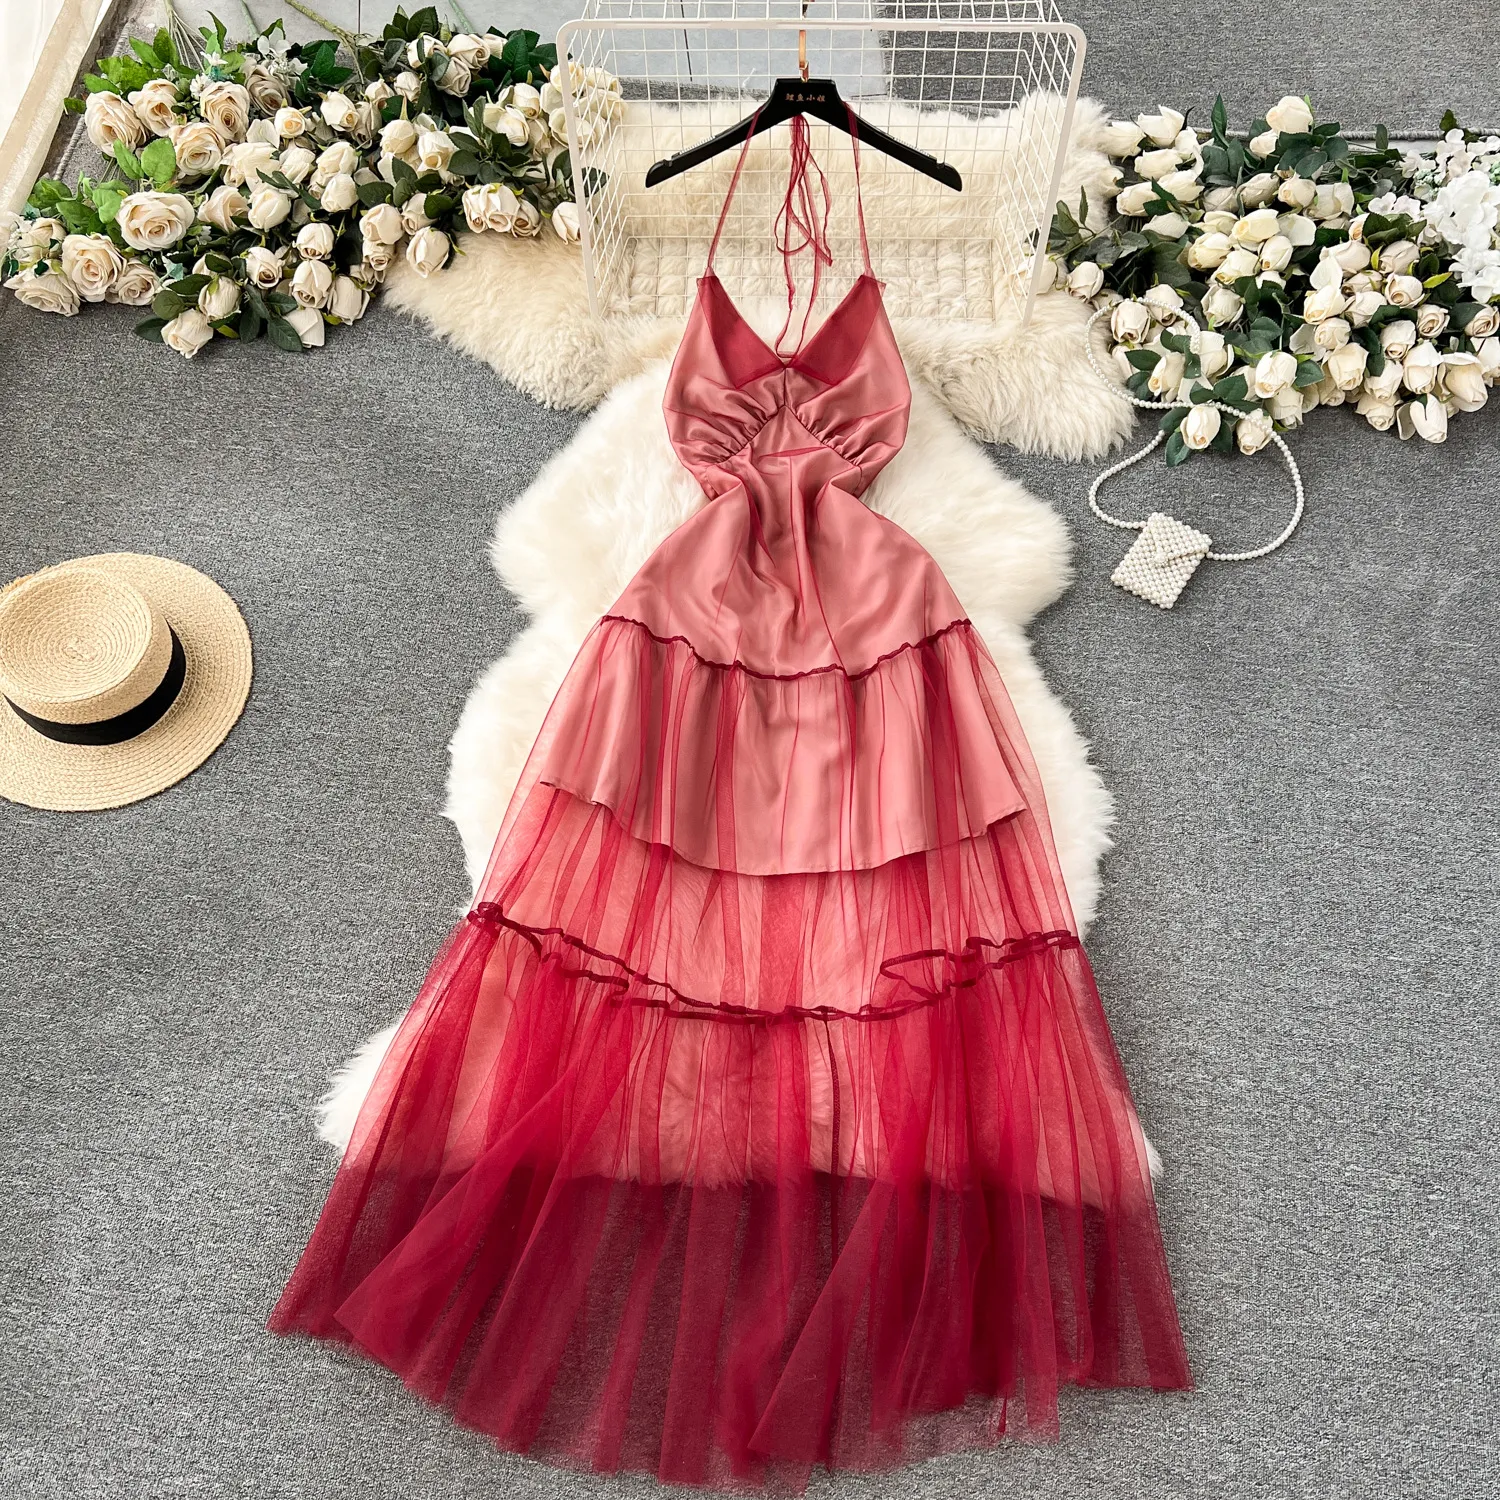 High end luxury and socialite style dress for women, with a design sense of strapping, backless, slim fit, and a long and elegant mesh hanging neck dress for women